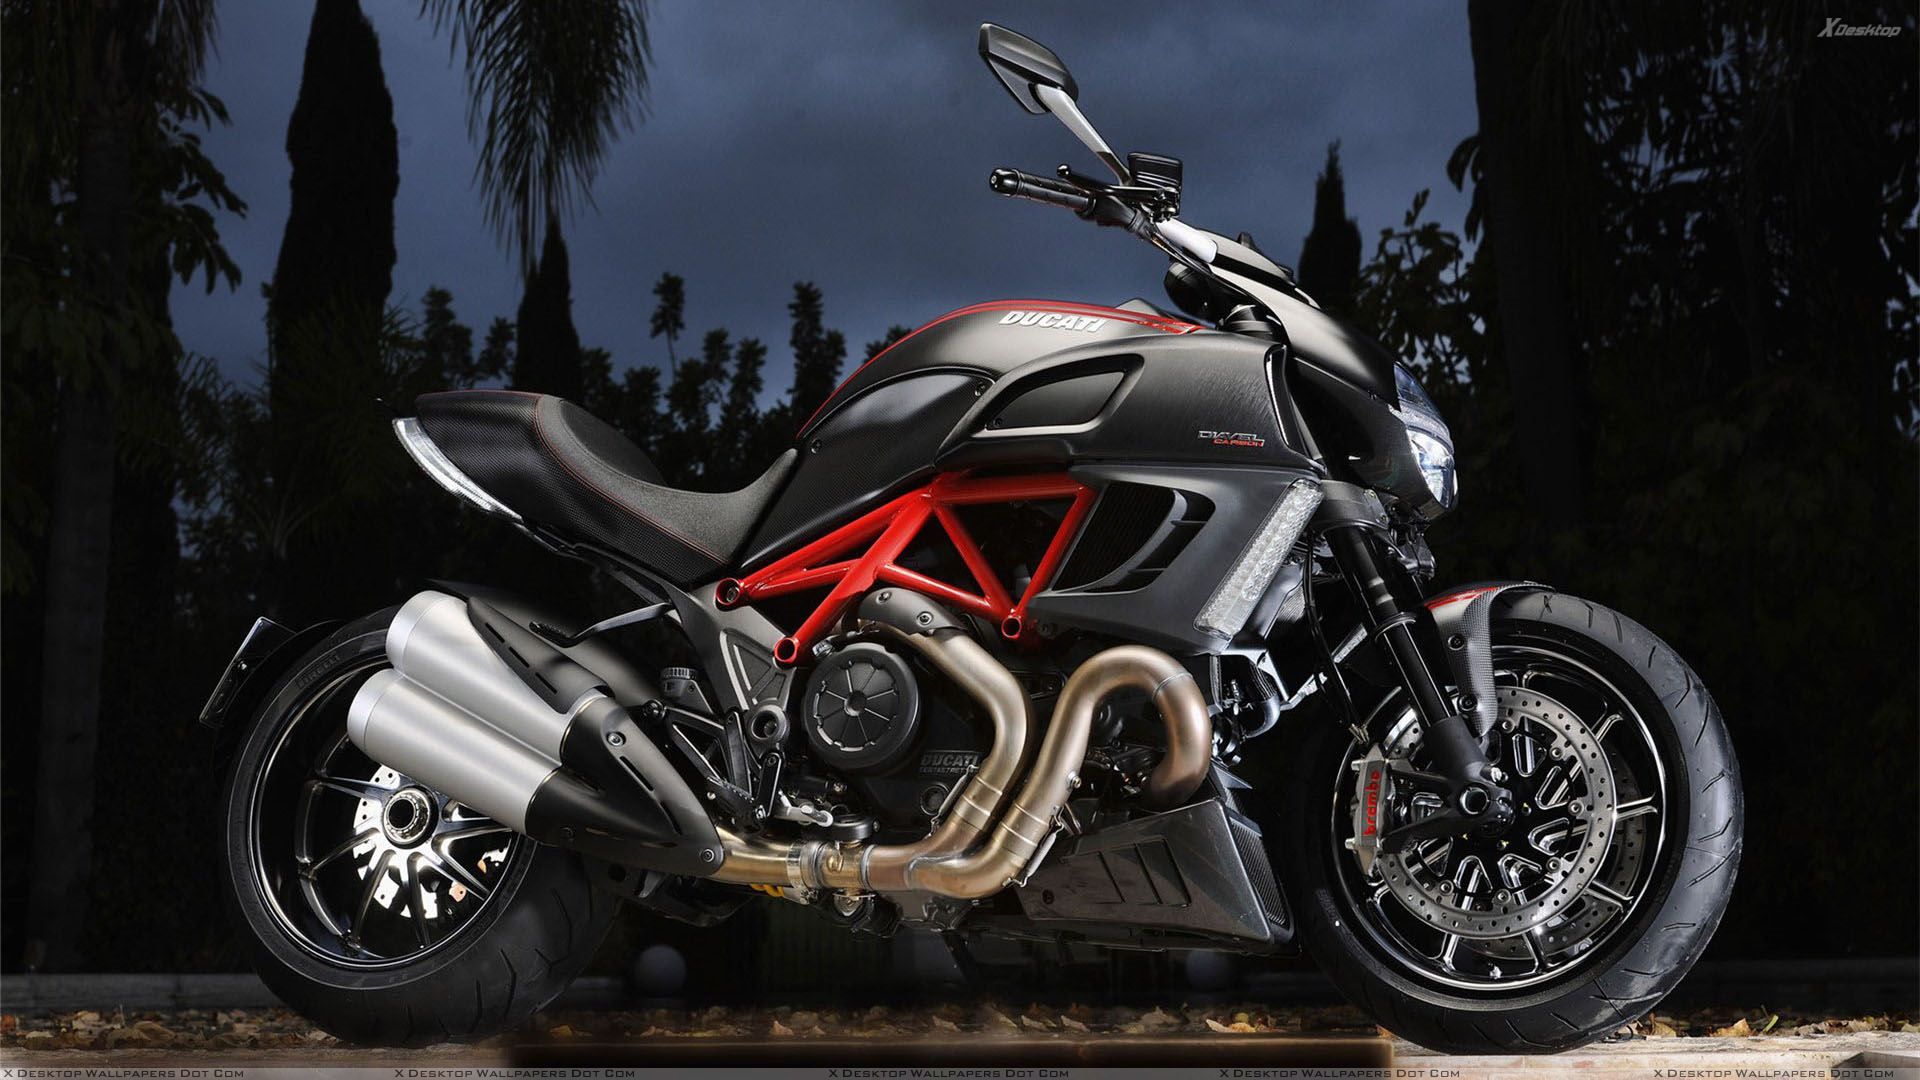 Ducati Diavel Wallpapers, Photos & Images In Hd - Ducati Duvalle , HD Wallpaper & Backgrounds